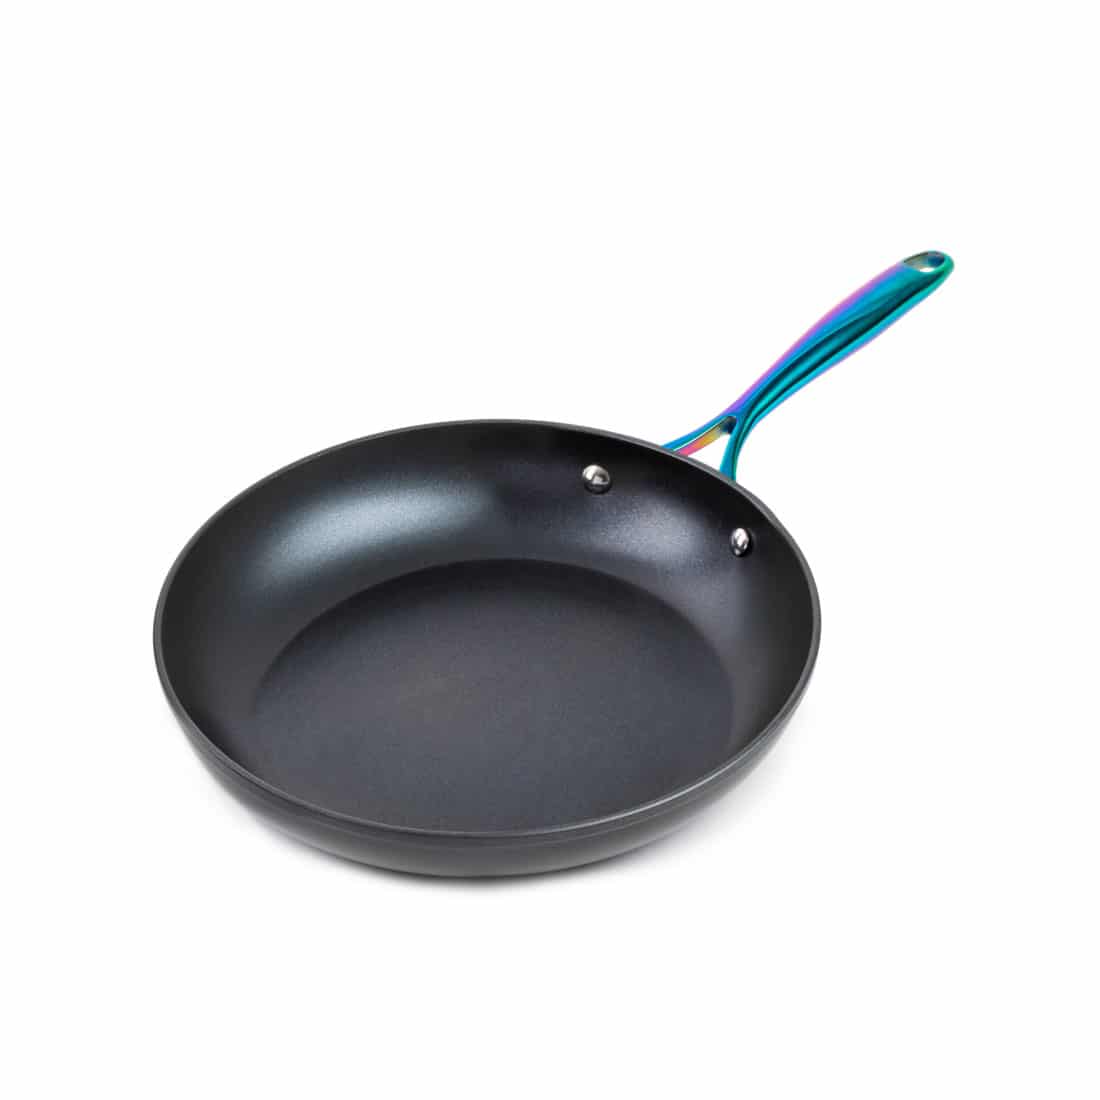 https://explorethymeandtable.com/wp-content/uploads/2021/02/rainbow-12in-frypan.jpg